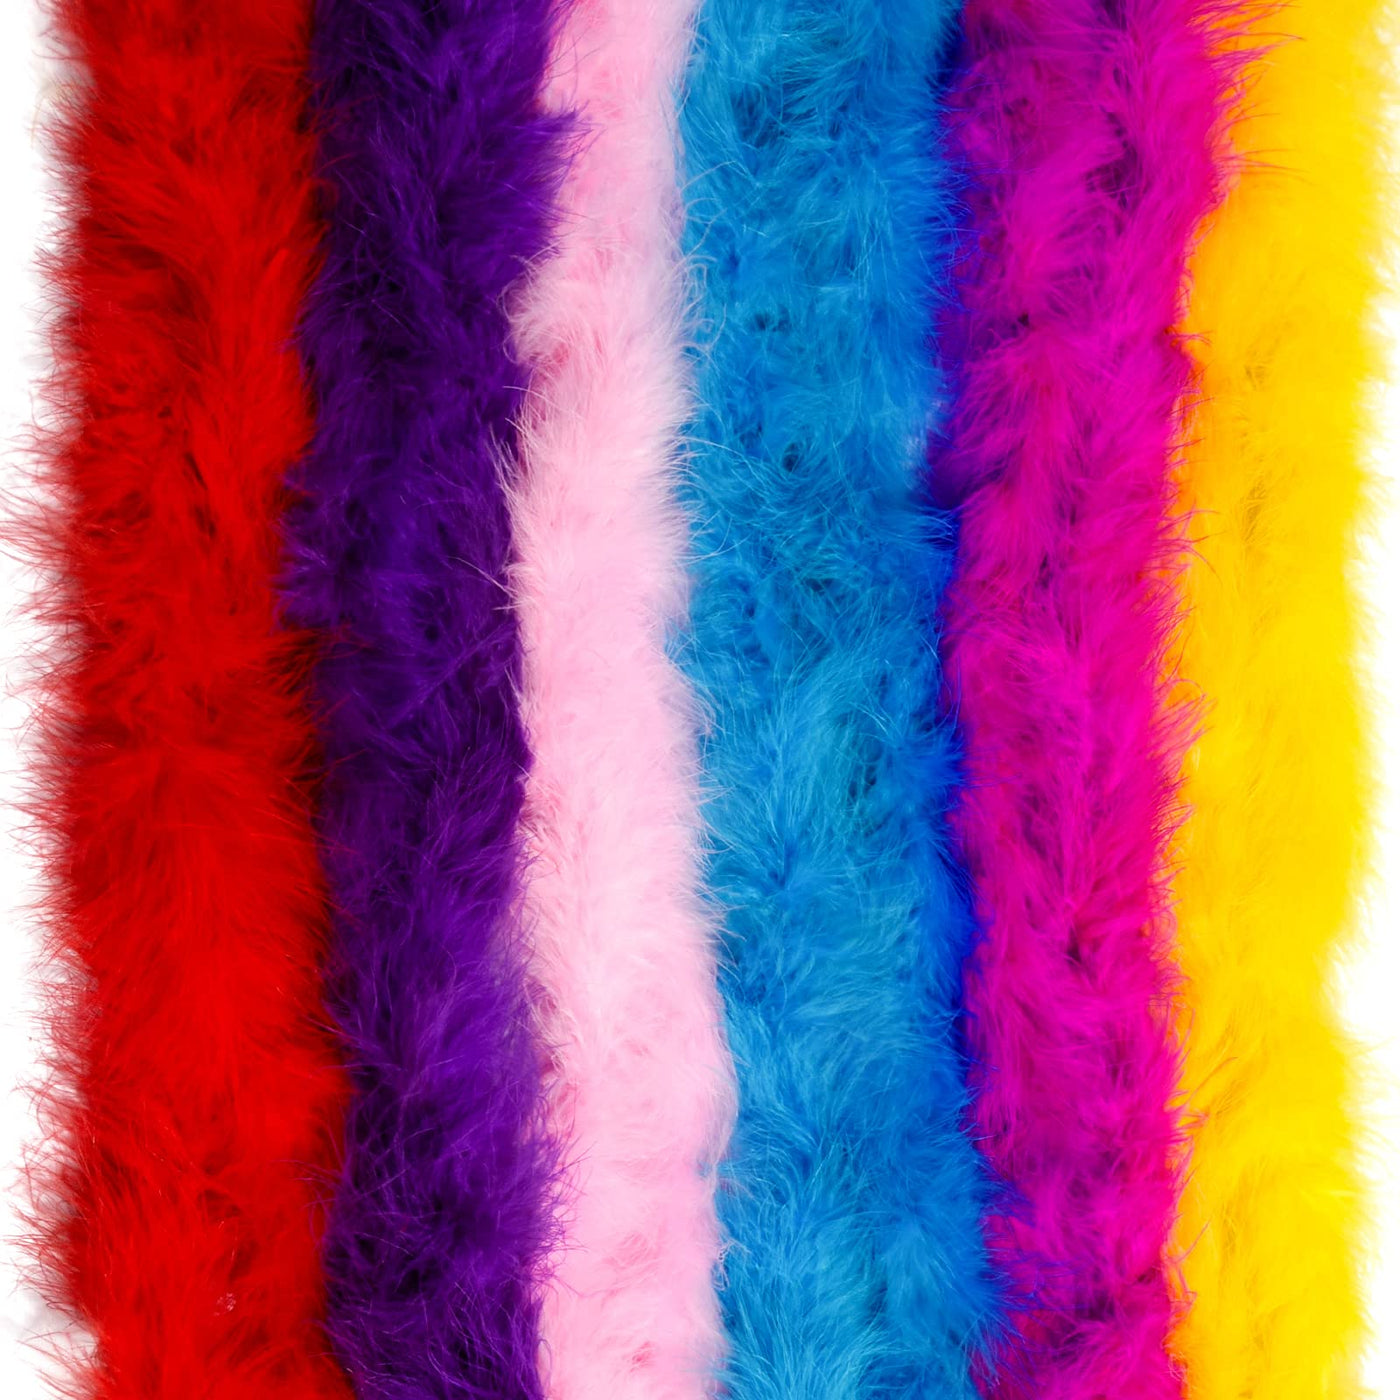 cynthiasfeathers Wholesale 8 Pieces 100 Gram Chandelle Feather Boas Dancing Crafting Party Dress Up Halloween Costume Decoration 6 Color Choices